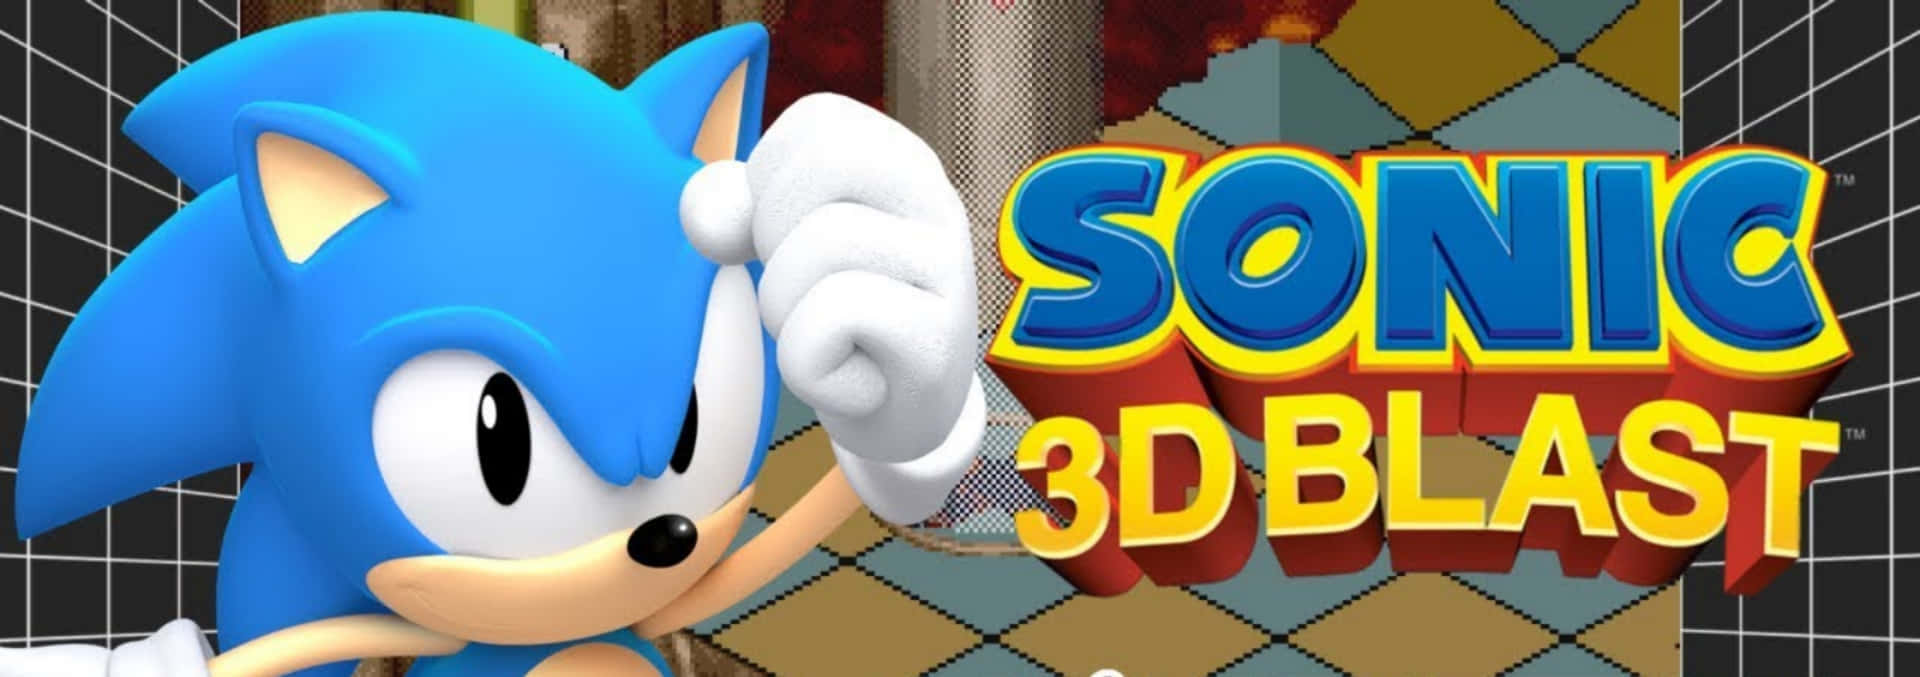 Sonic the Hedgehog unleashes his fast-paced gameplay in Sonic 3D Blast Wallpaper